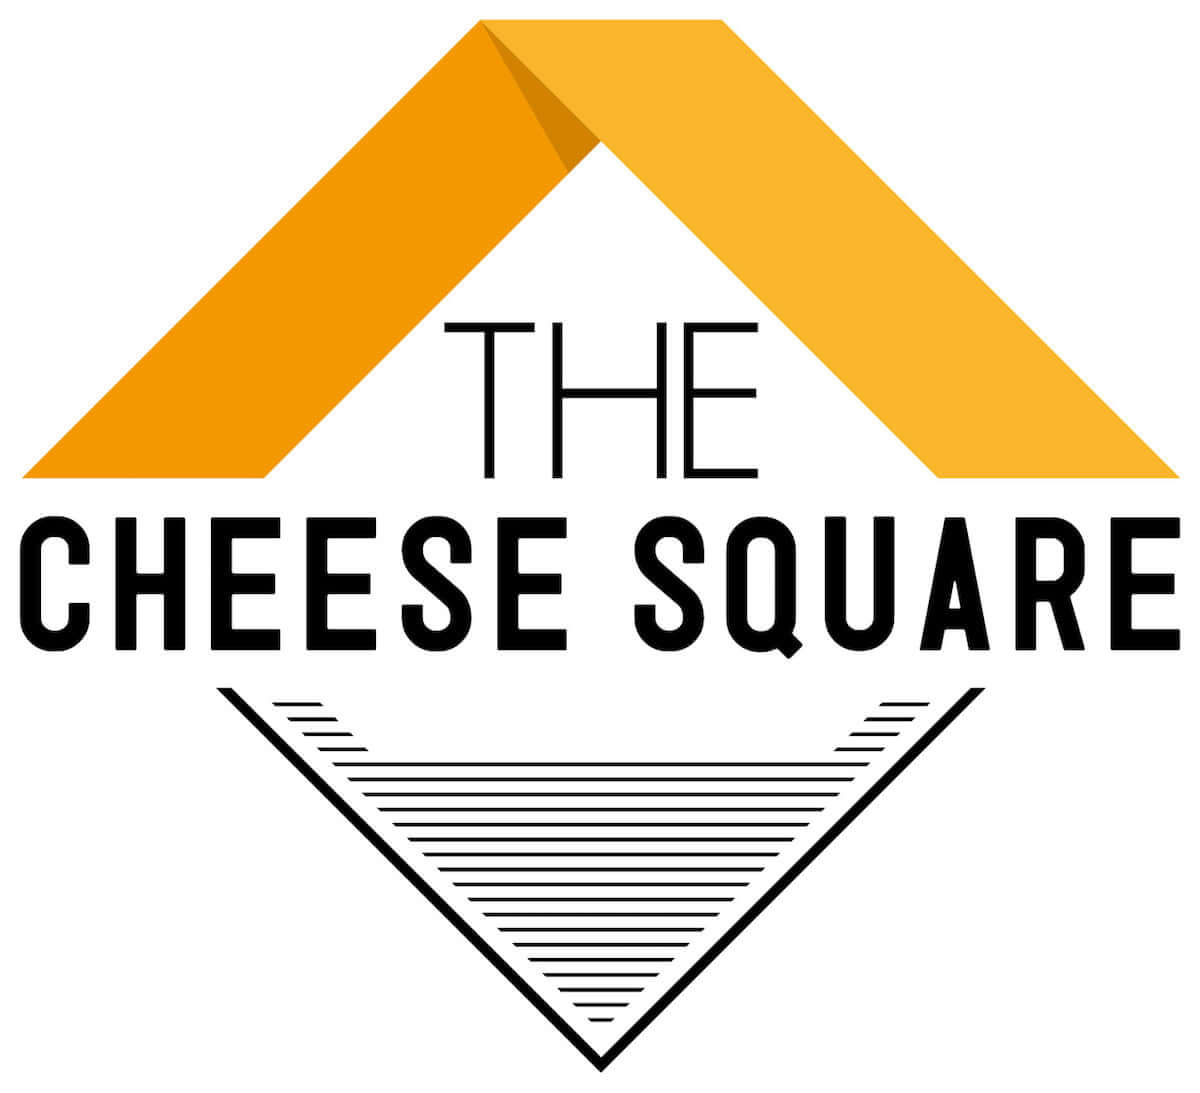 CHEESE SQUARE